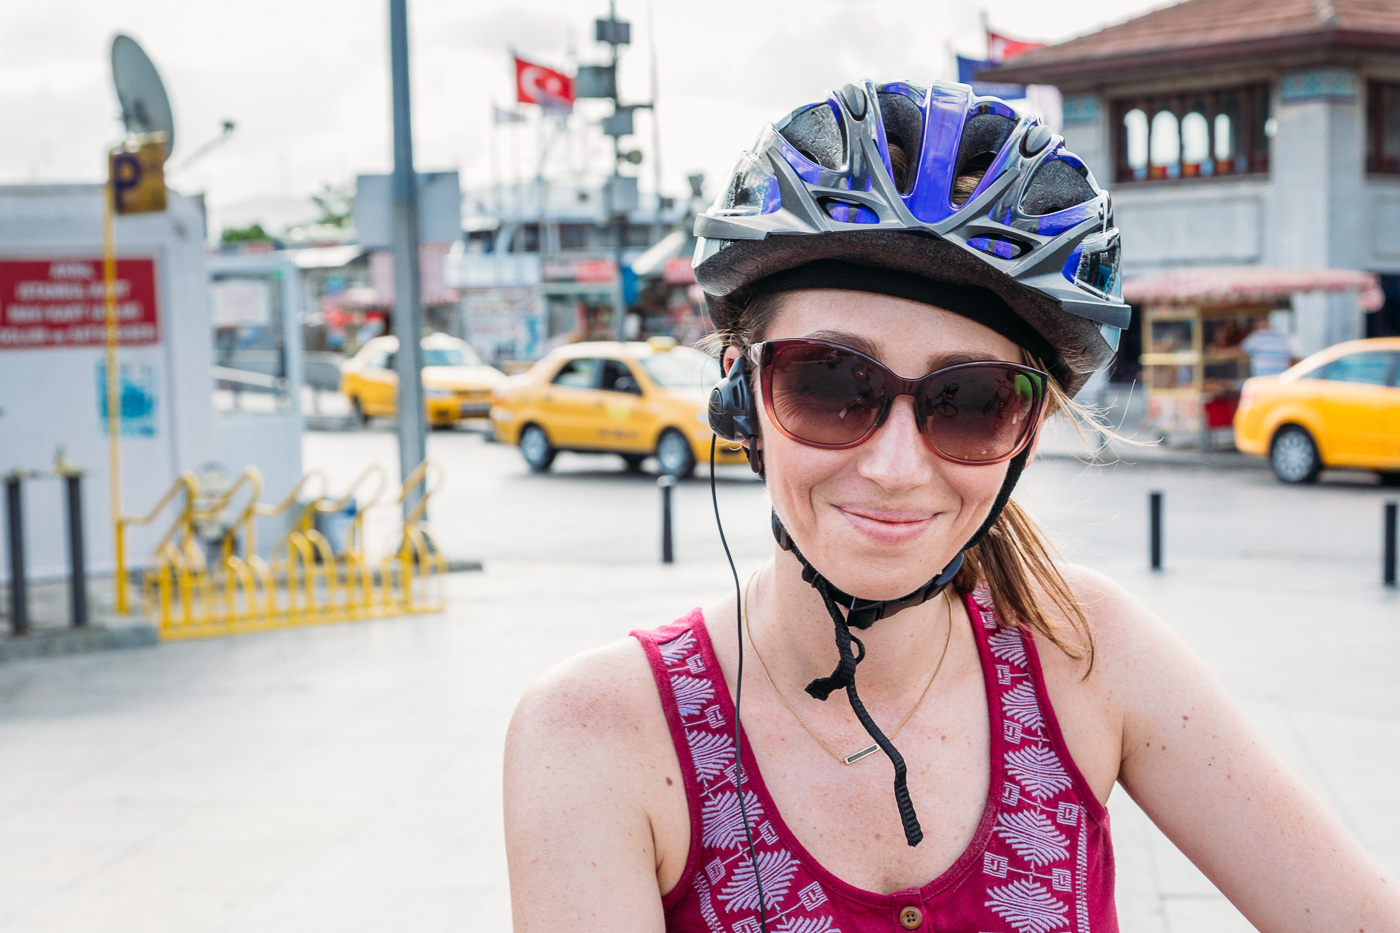 Rocking my helmet and headset for my upcoming ride with The Biker Istanbul